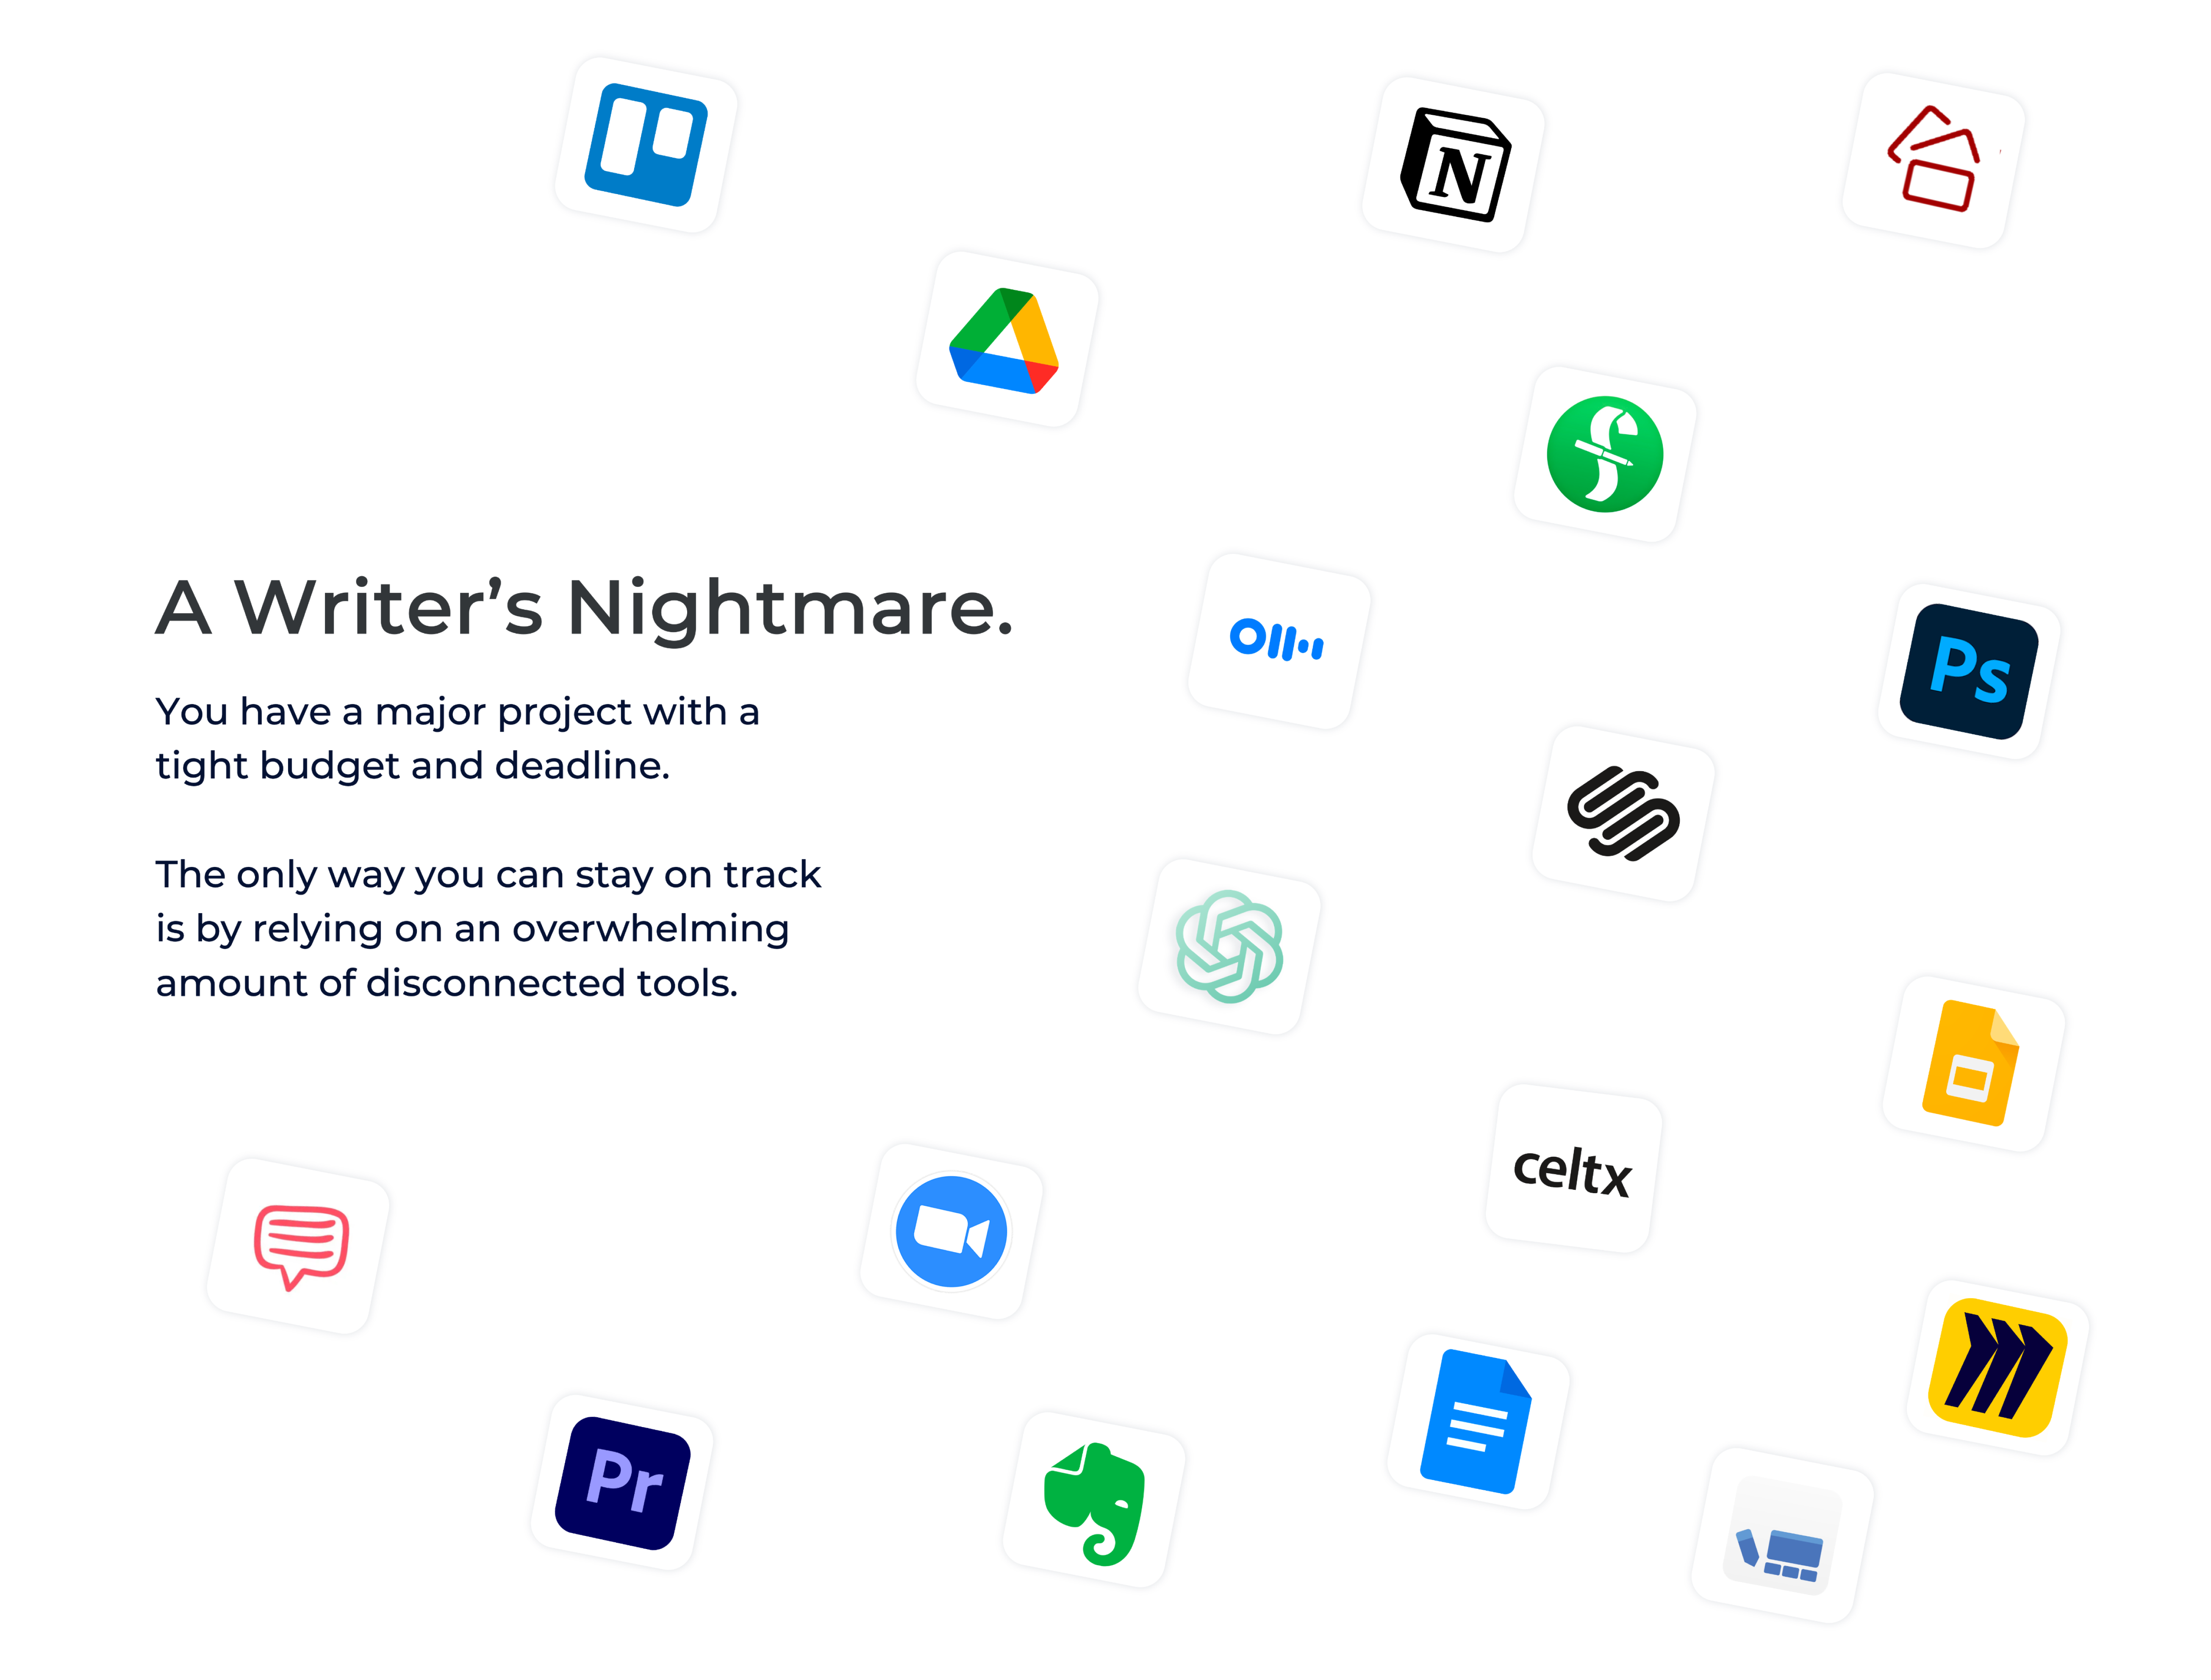 A writer's nightmare.

You have a major project with a tight budget and deadline. 

The only way you can stay on track is by relying on an overwhelming amount of disconnected tools, including google drive, google docs, microsoft word, chatGPT, studio binder, Otter.ai, slides, trello, miro, photoshop, final draft and more. 
